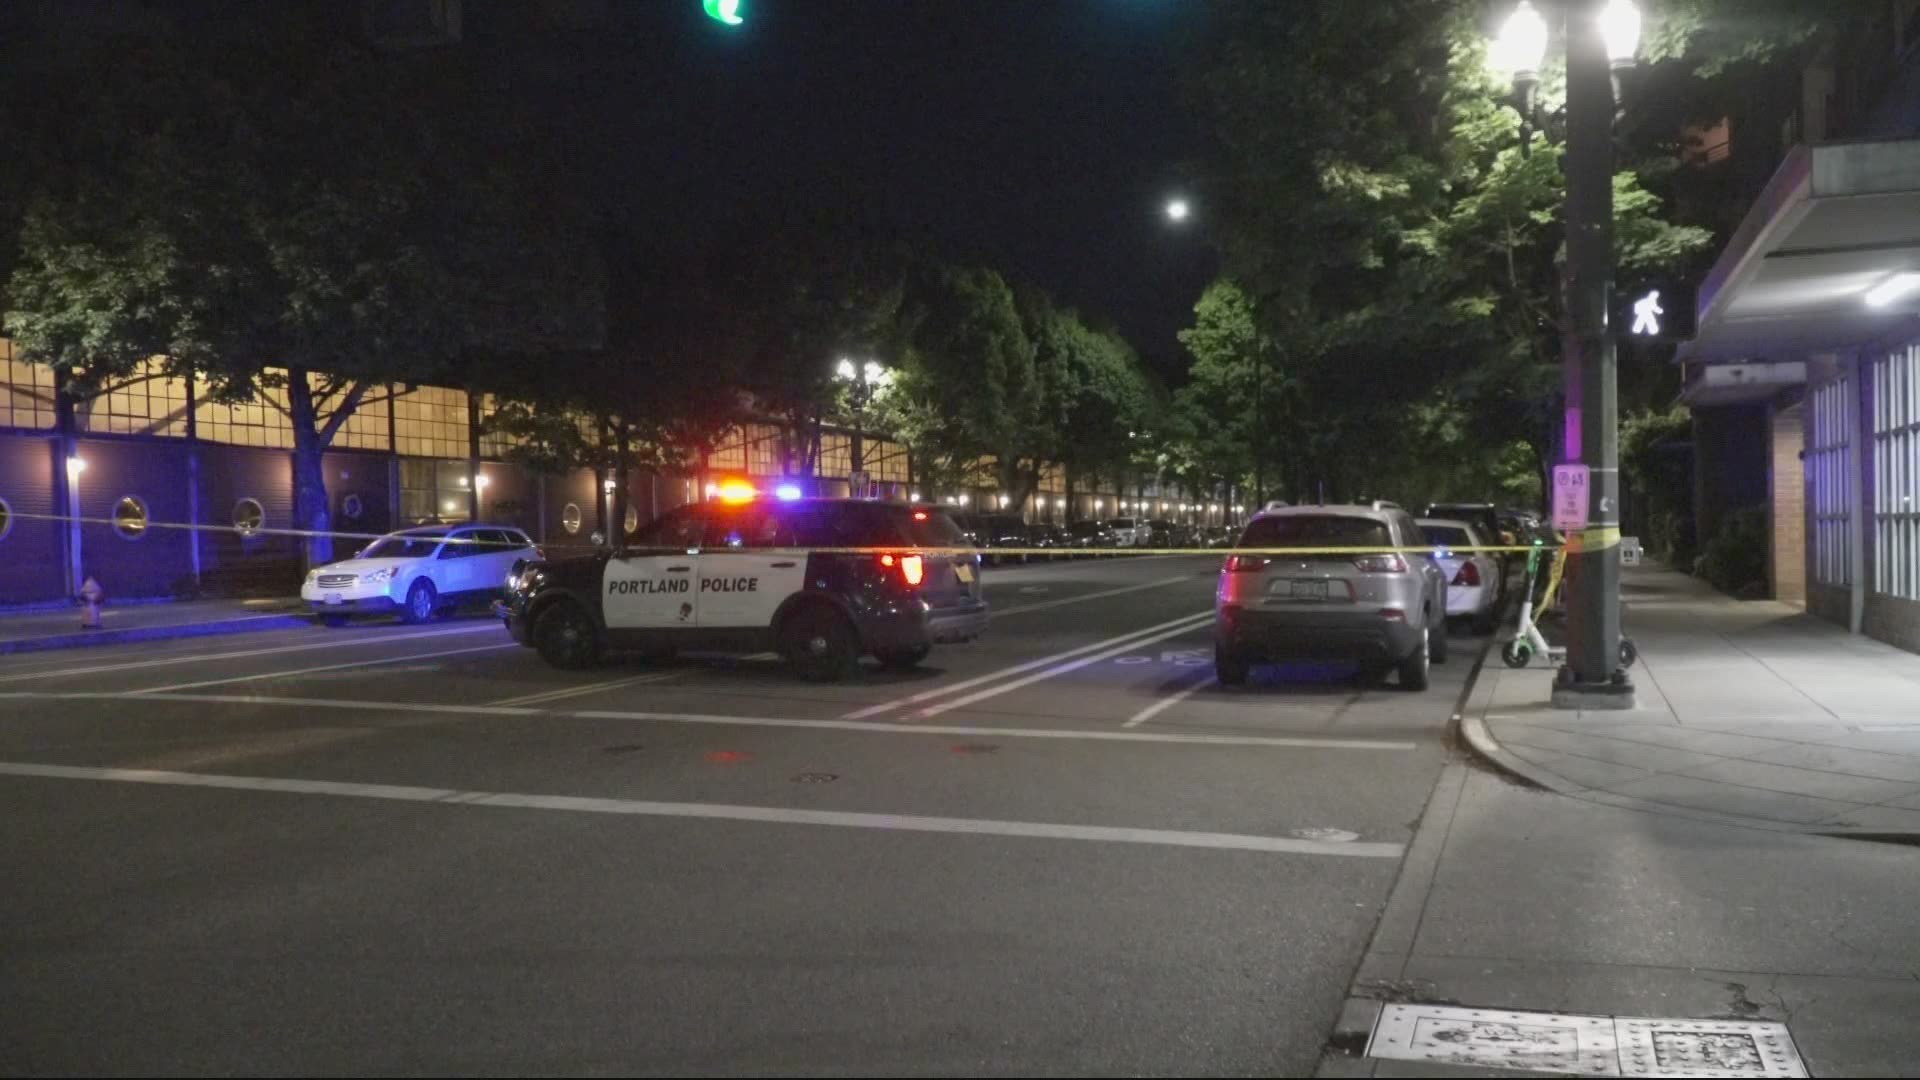 A Portland police officer shot a man inside a convenience store Tuesday night. The man is expected to survive.